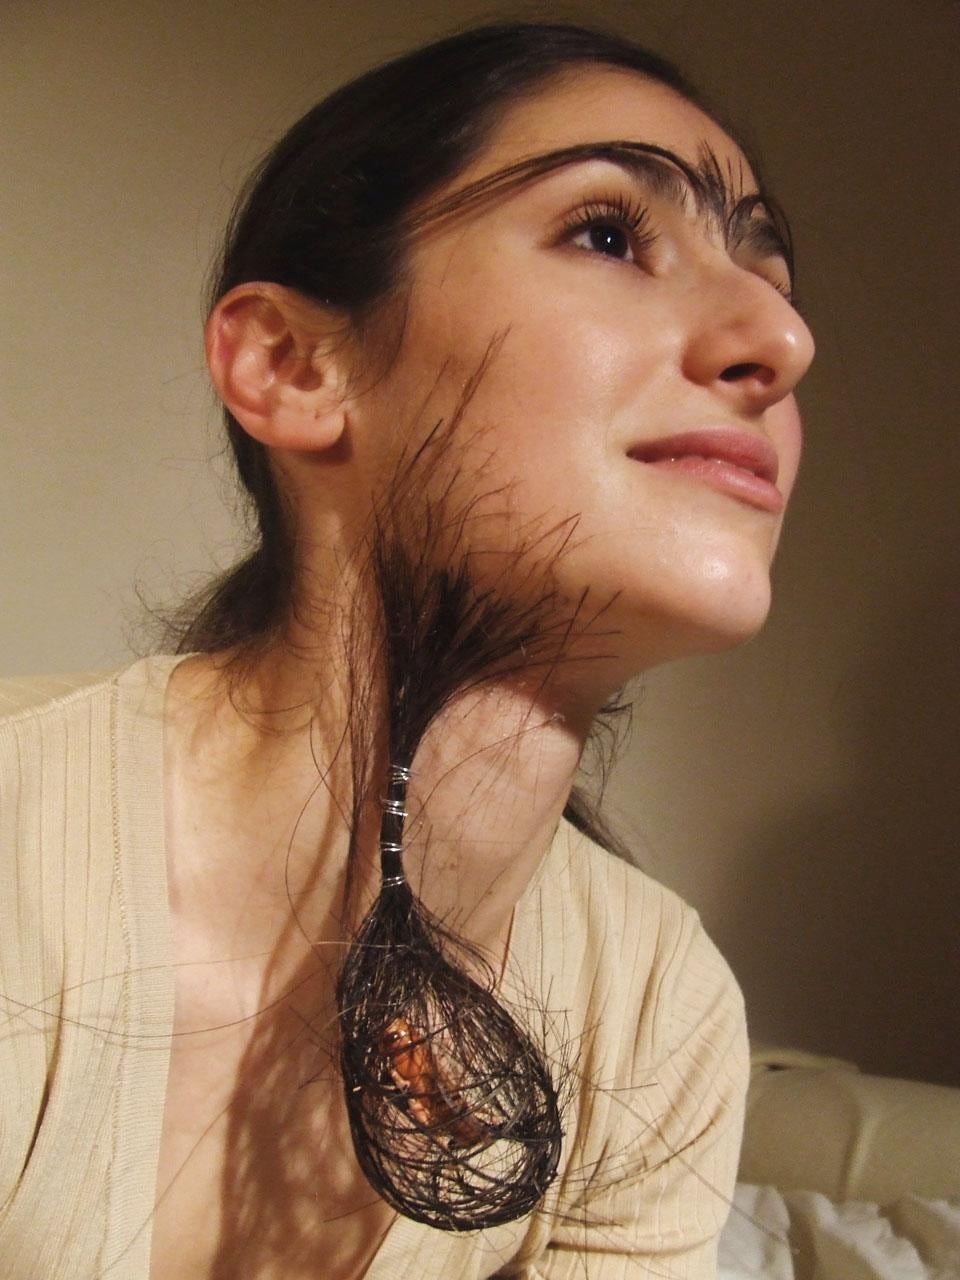 Michael Burton, <i>Hair
Harbourer</i> (from <i>The Race</i>
series), 2007. He exploits
the genetic condition of
hypertrichosis (excessive bodily hair growth) to create
symbiotic habitats for insects,
parasites and bacteria,
prefiguring a throwback state
of the human animal.